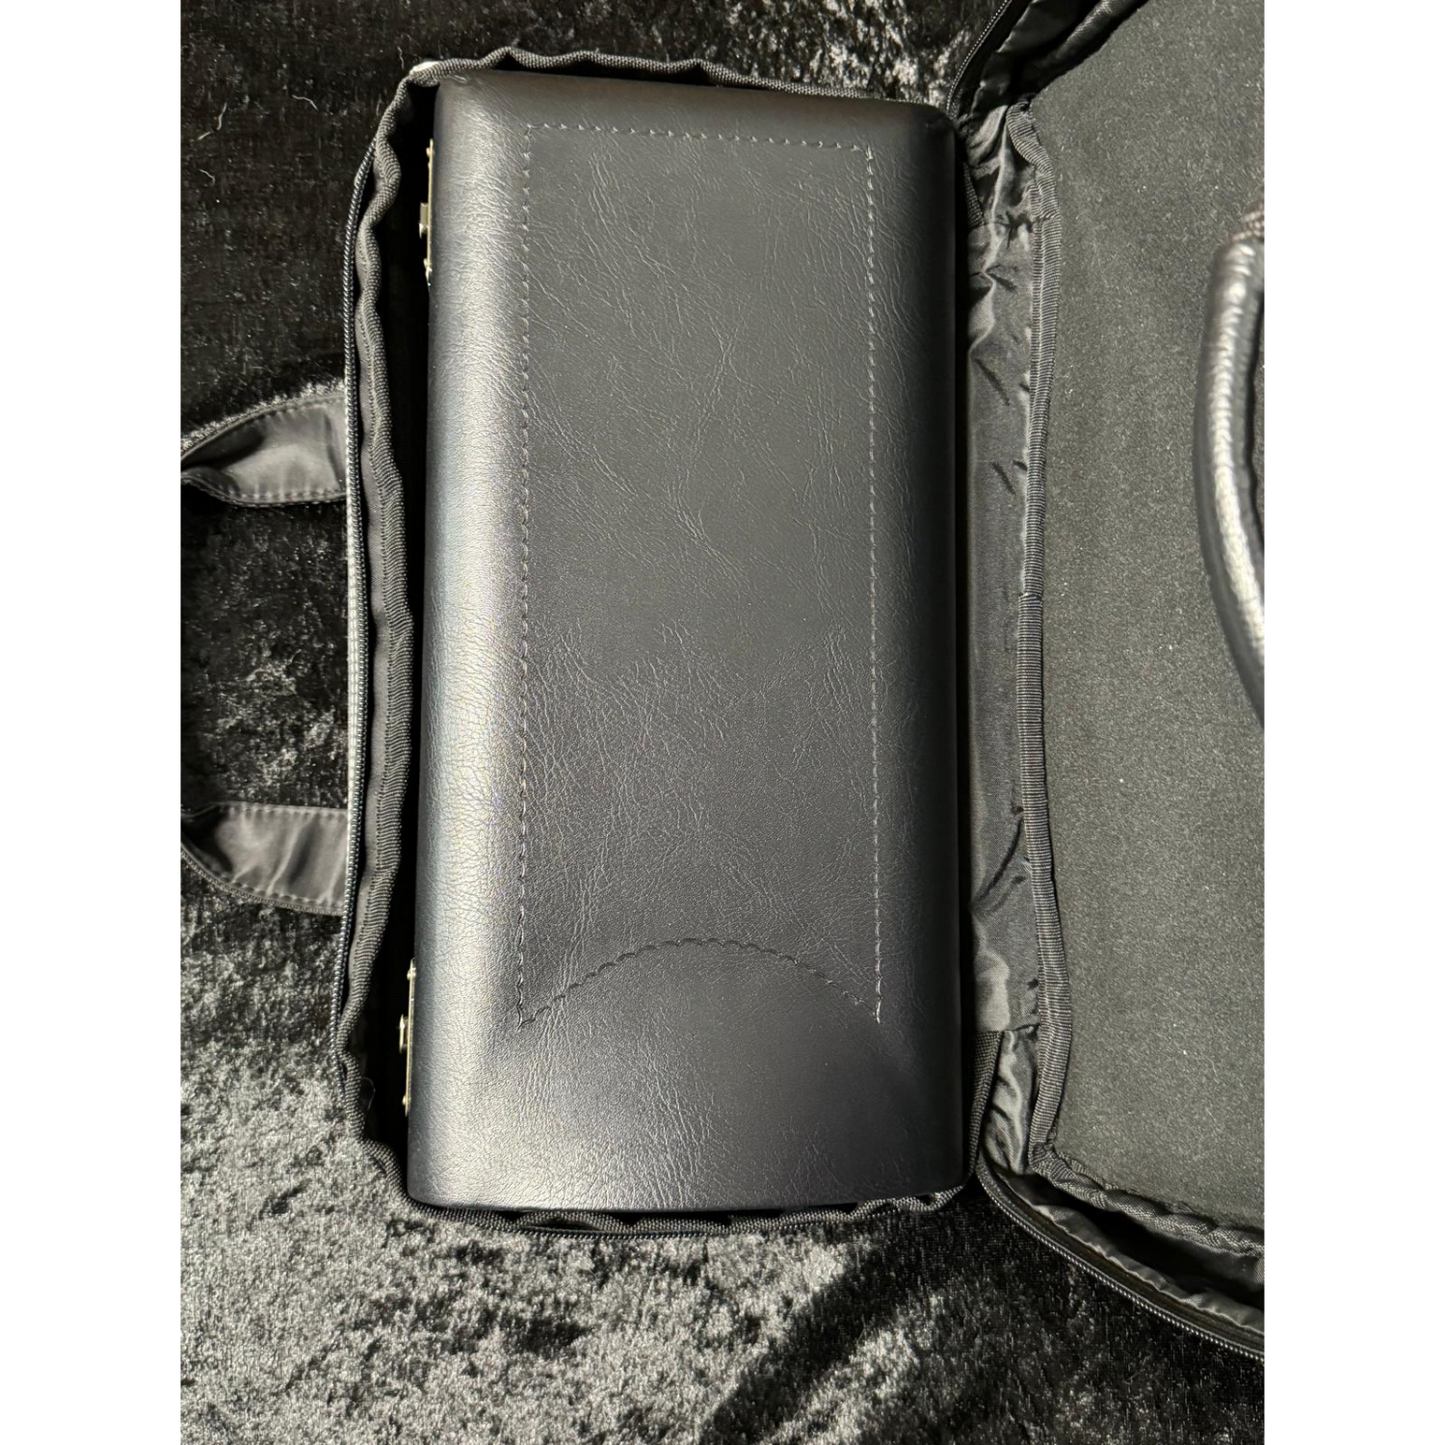 Yamaha CSG single Bb clarinet case, closed to show leather covering, inside leather carrying bag